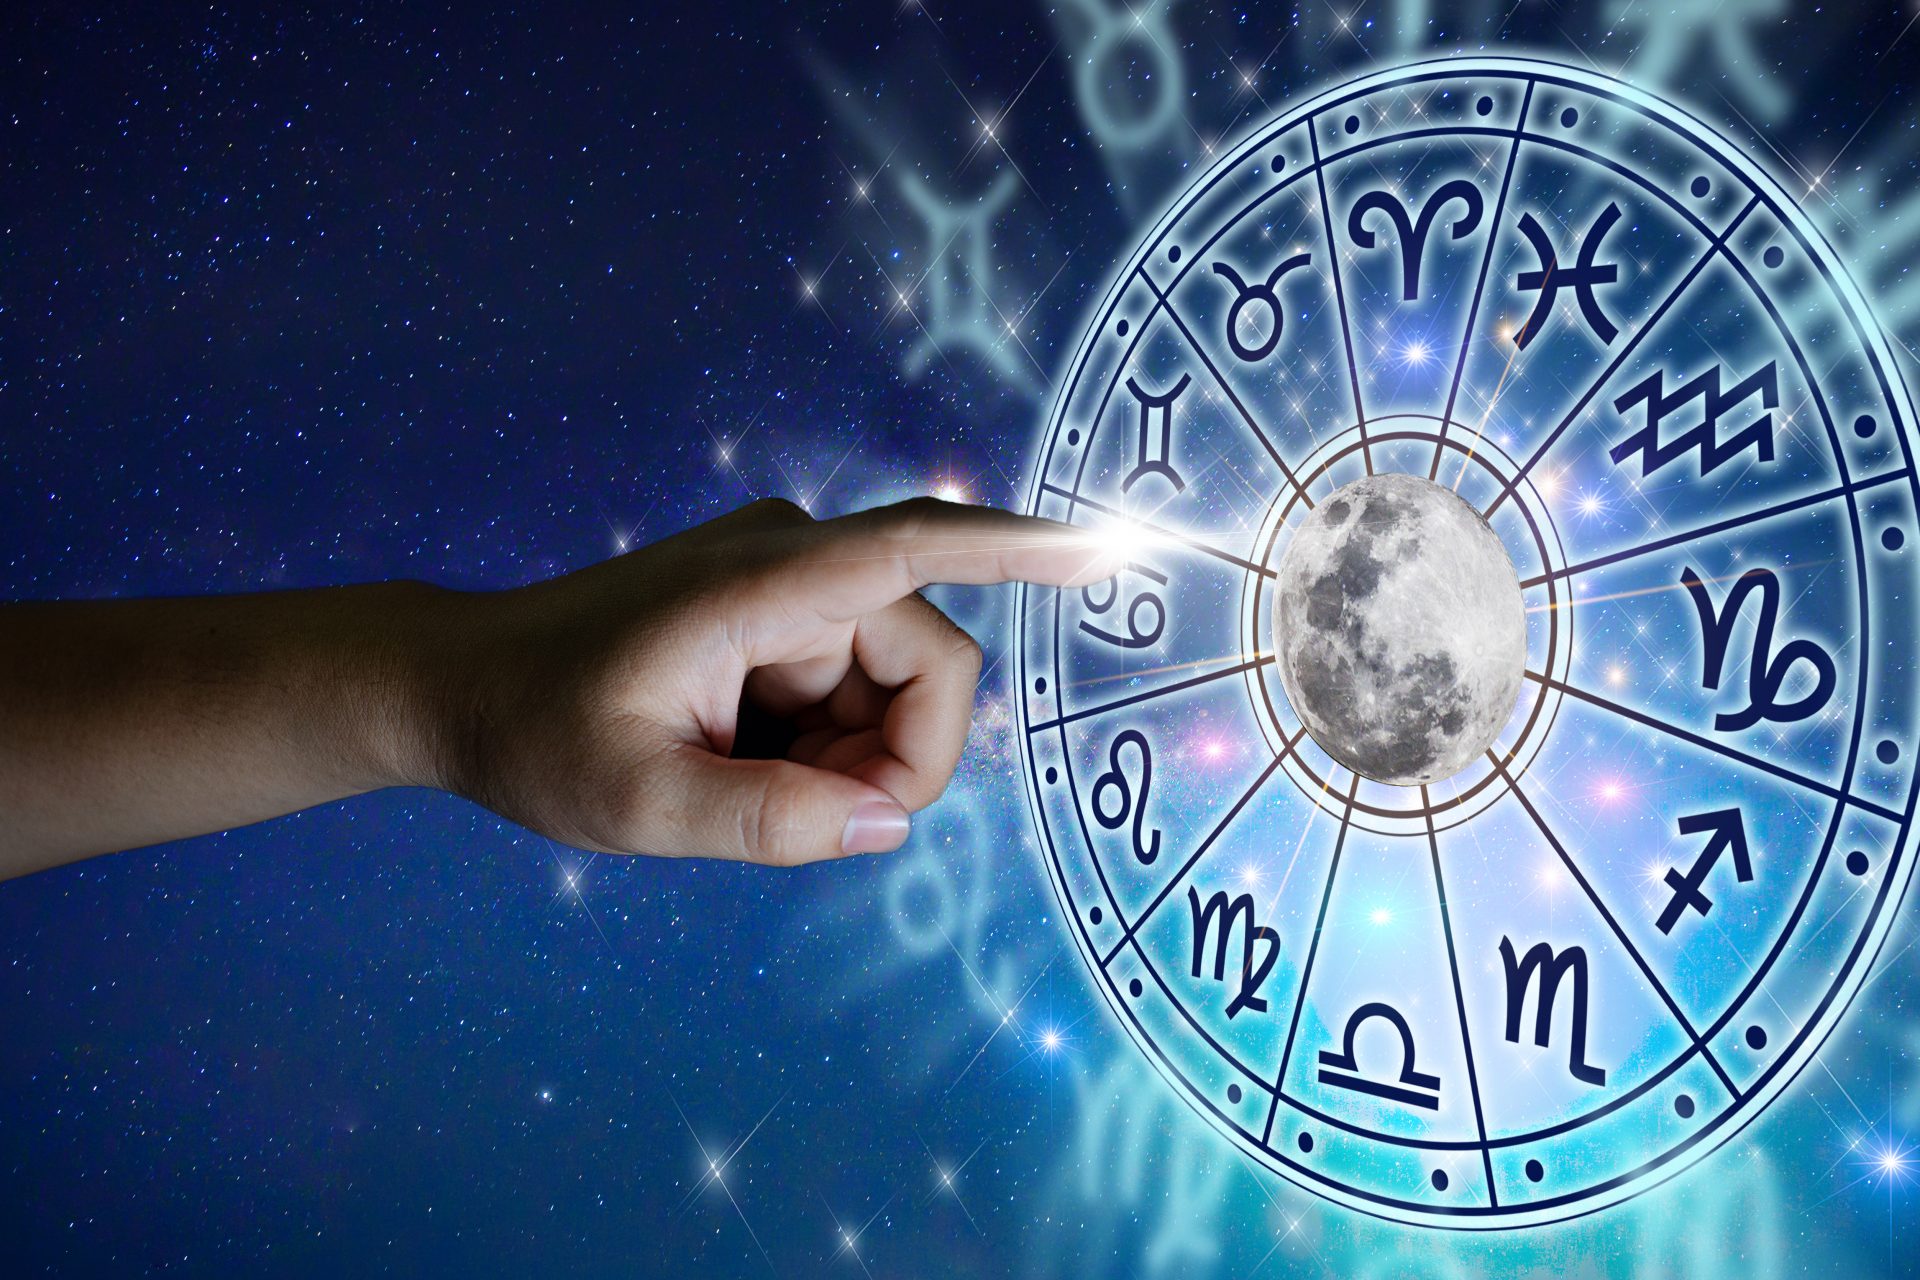 April horoscope: this month will be excellent for these 4 signs!